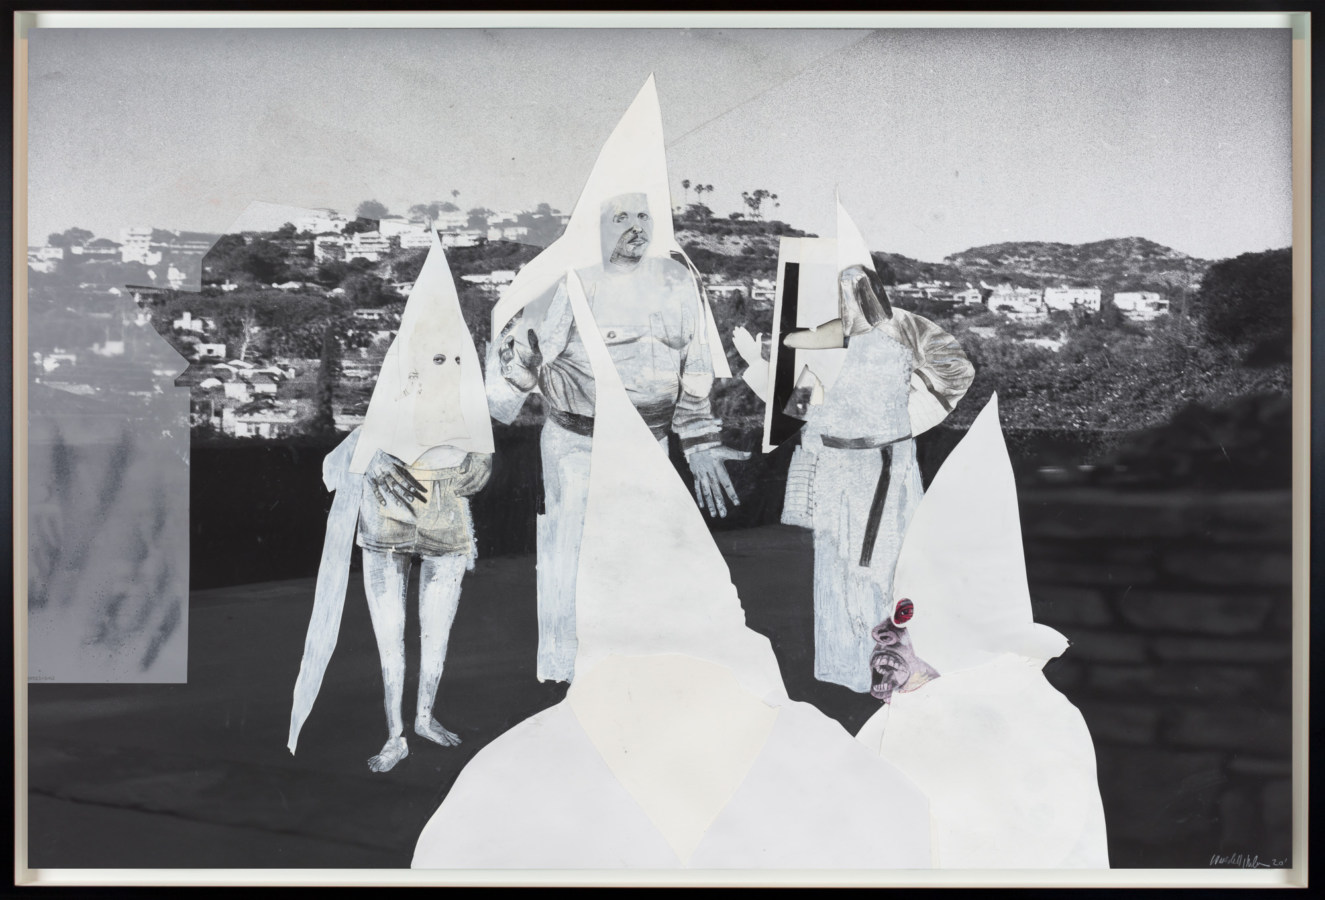 A black, white, and gray collage of five Klansmen in a circle. The background is the LA hills.